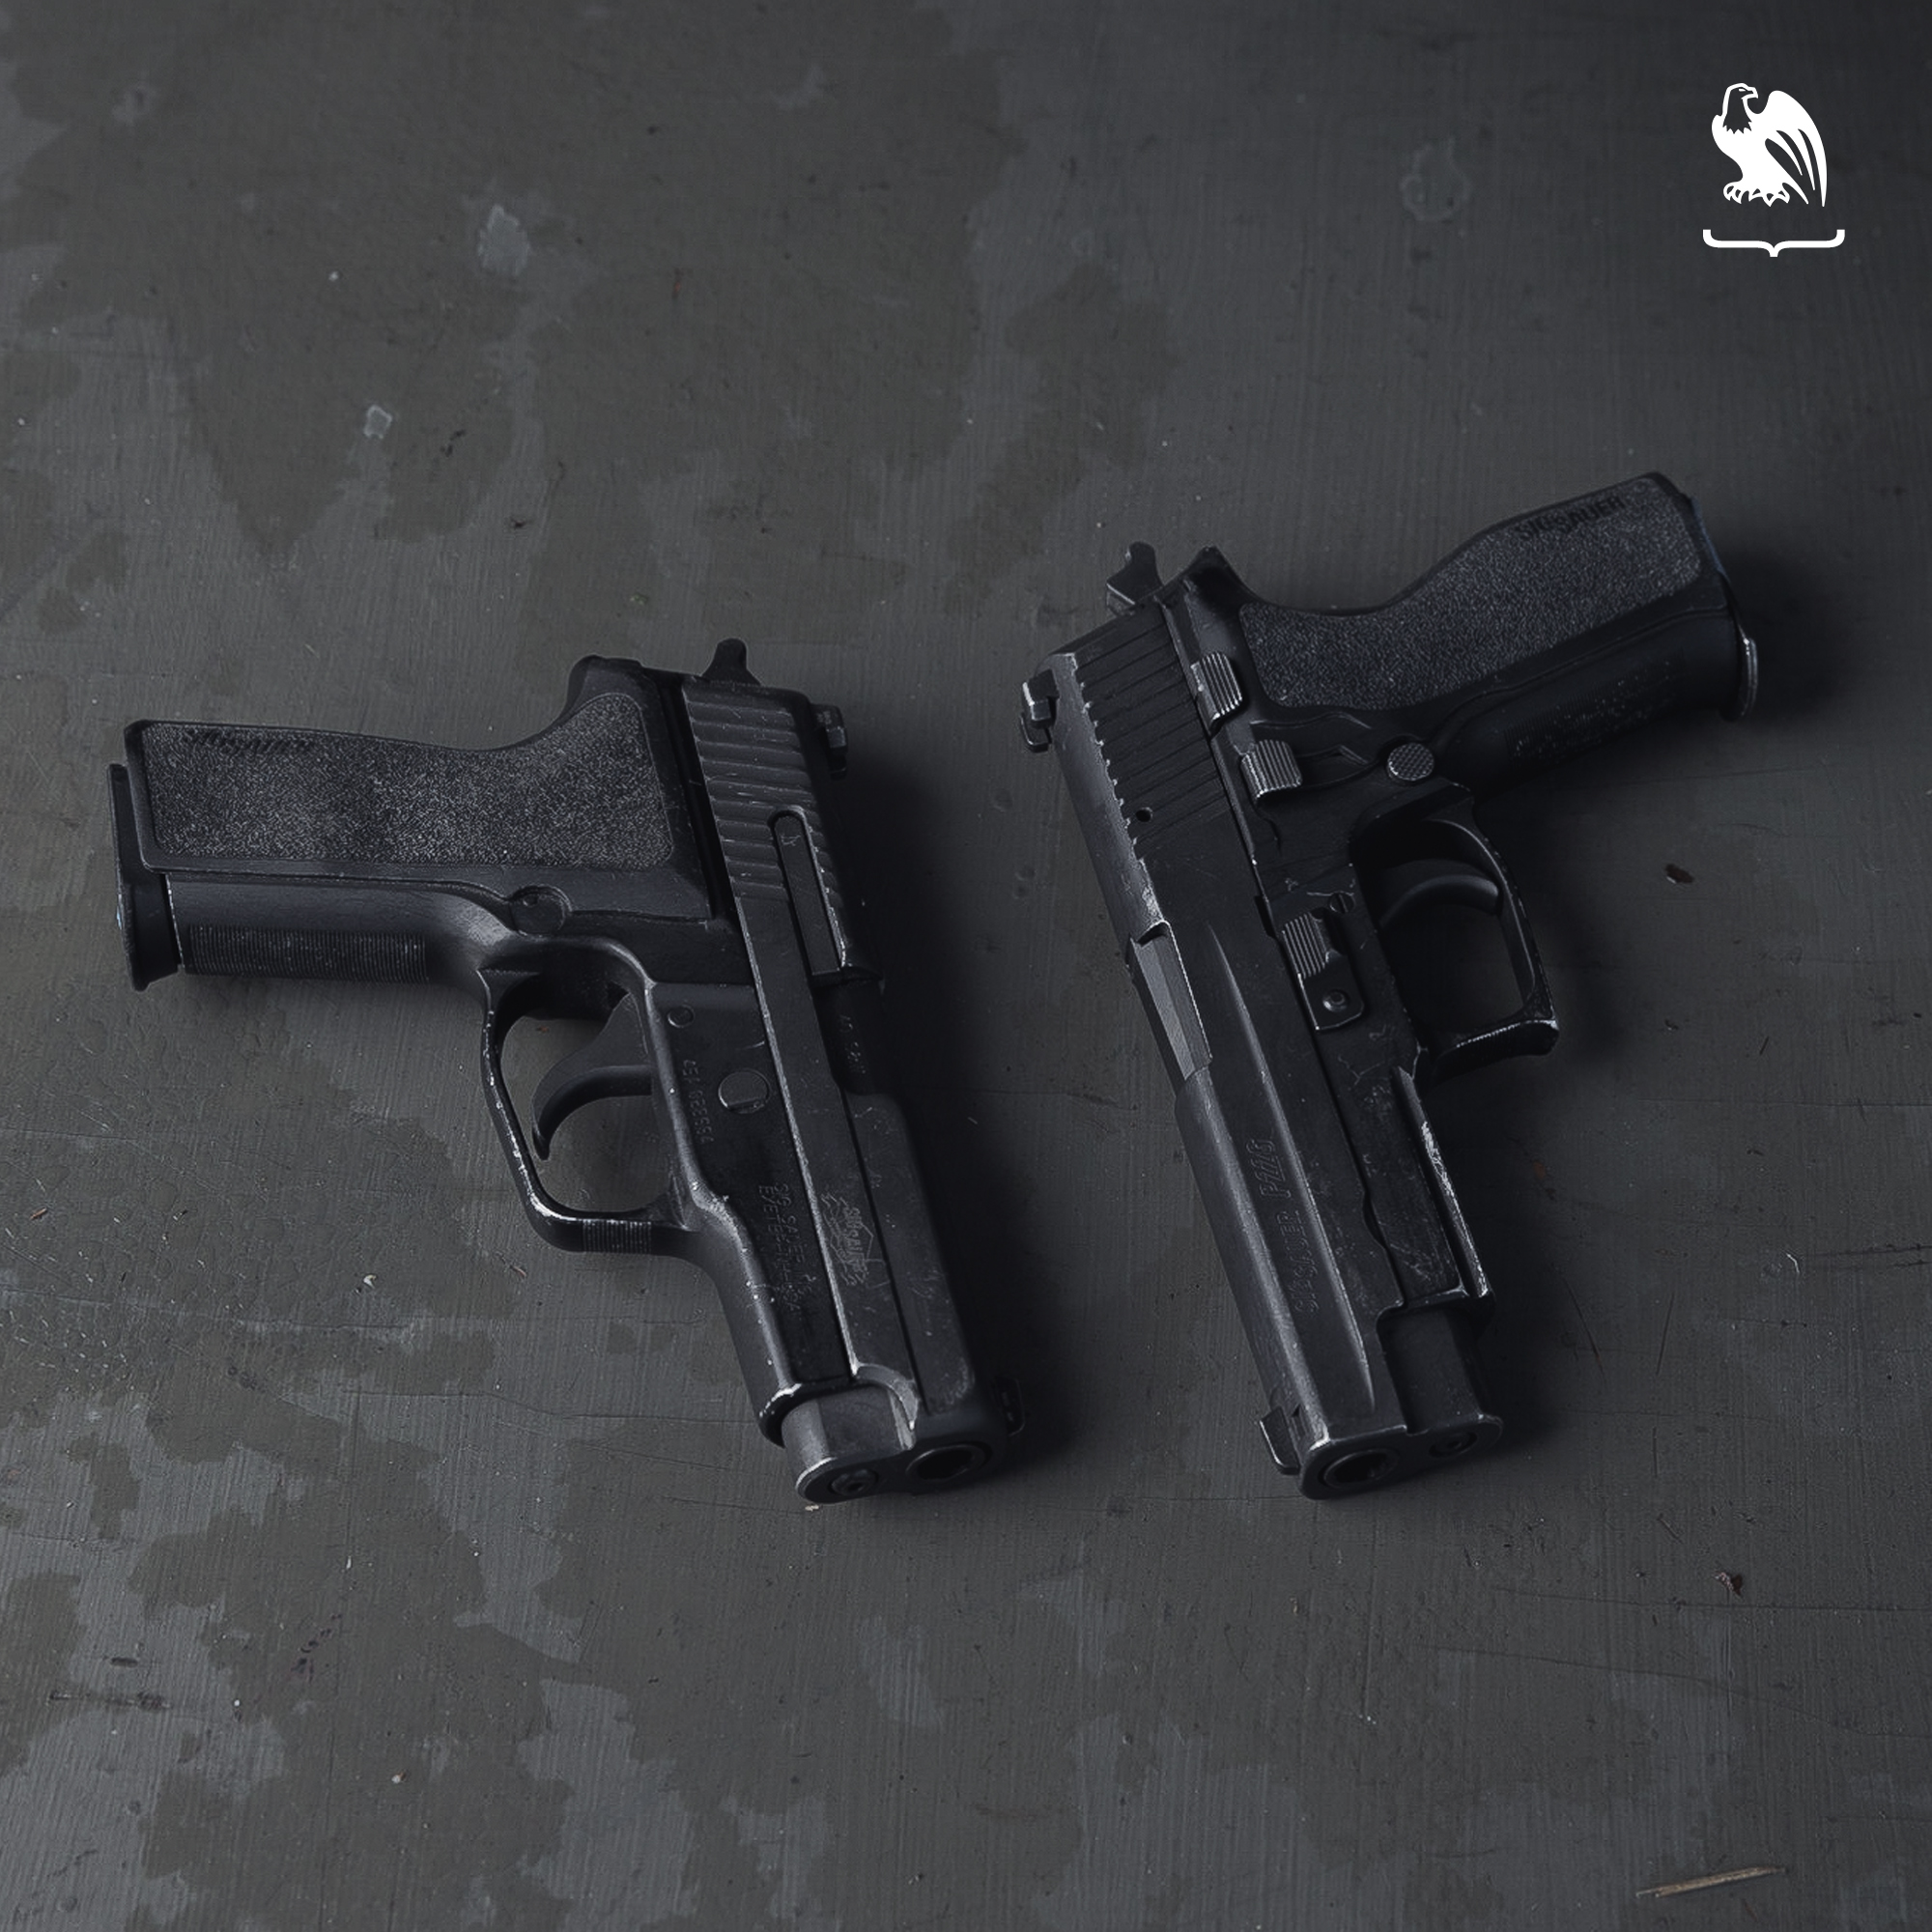 Which is right for me? - Beretta Pico vs Ruger LCP